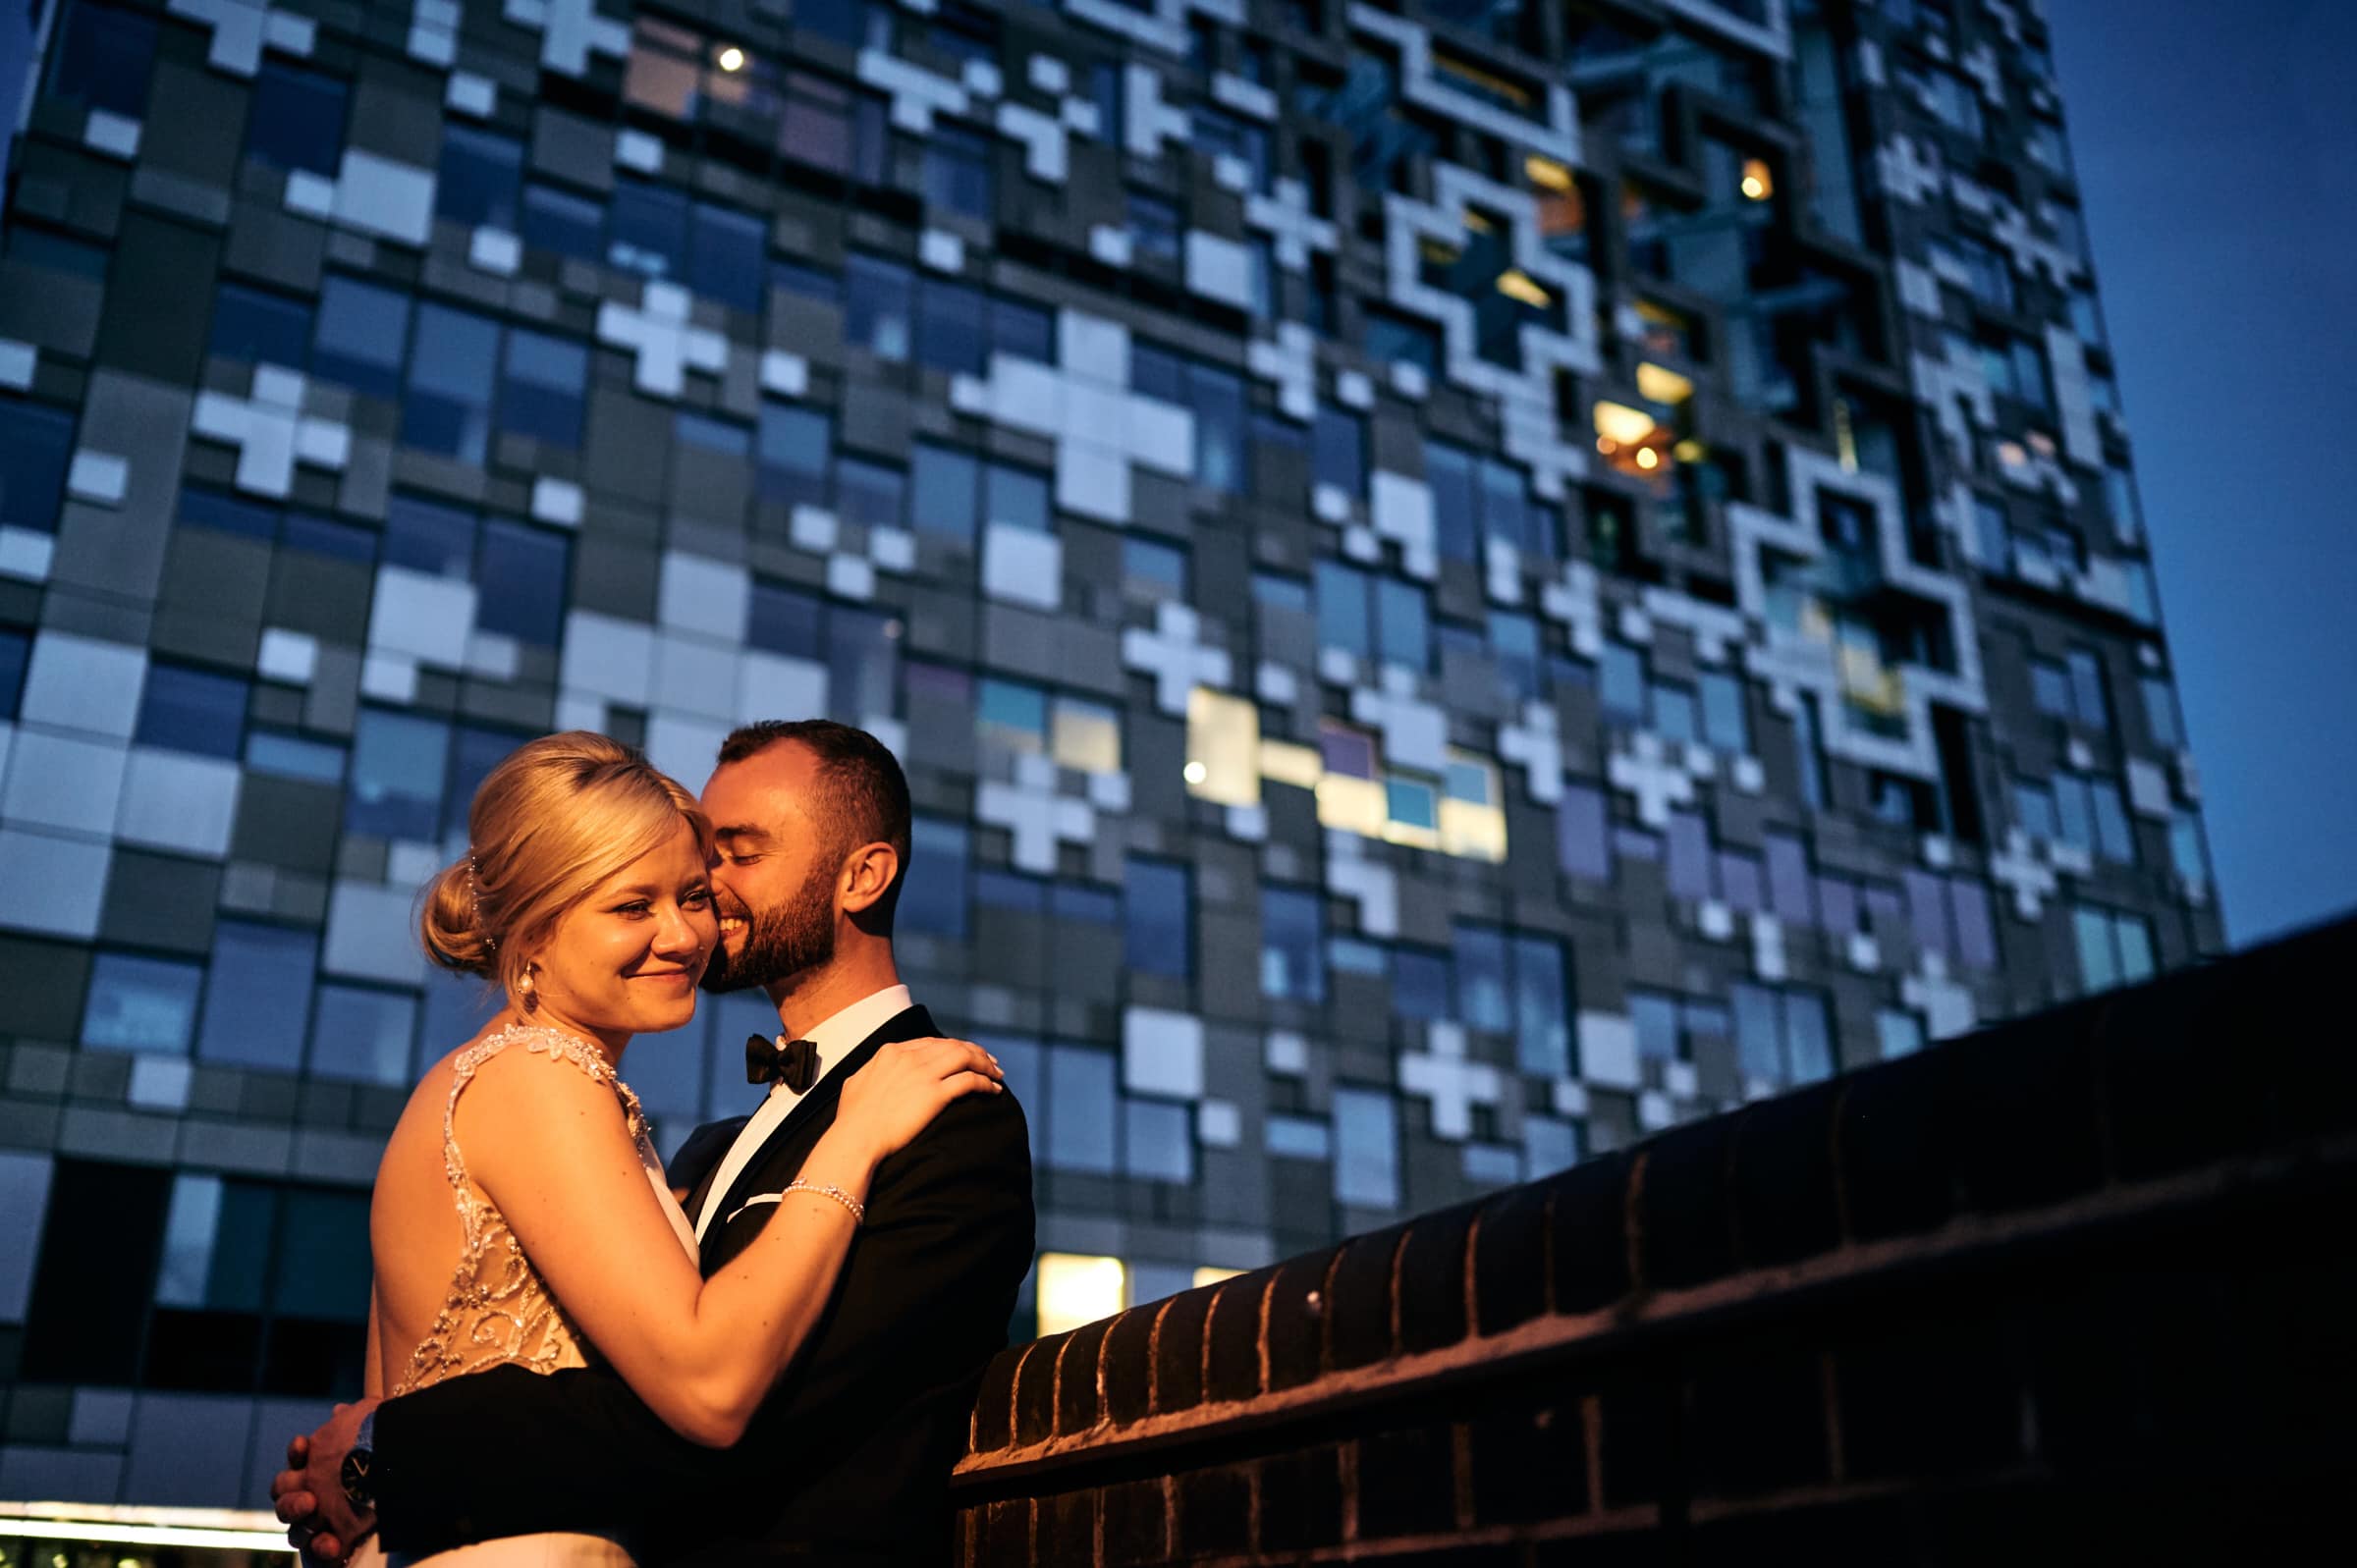 Bride and groom cuddled up at The Cube in Birmingham, at night